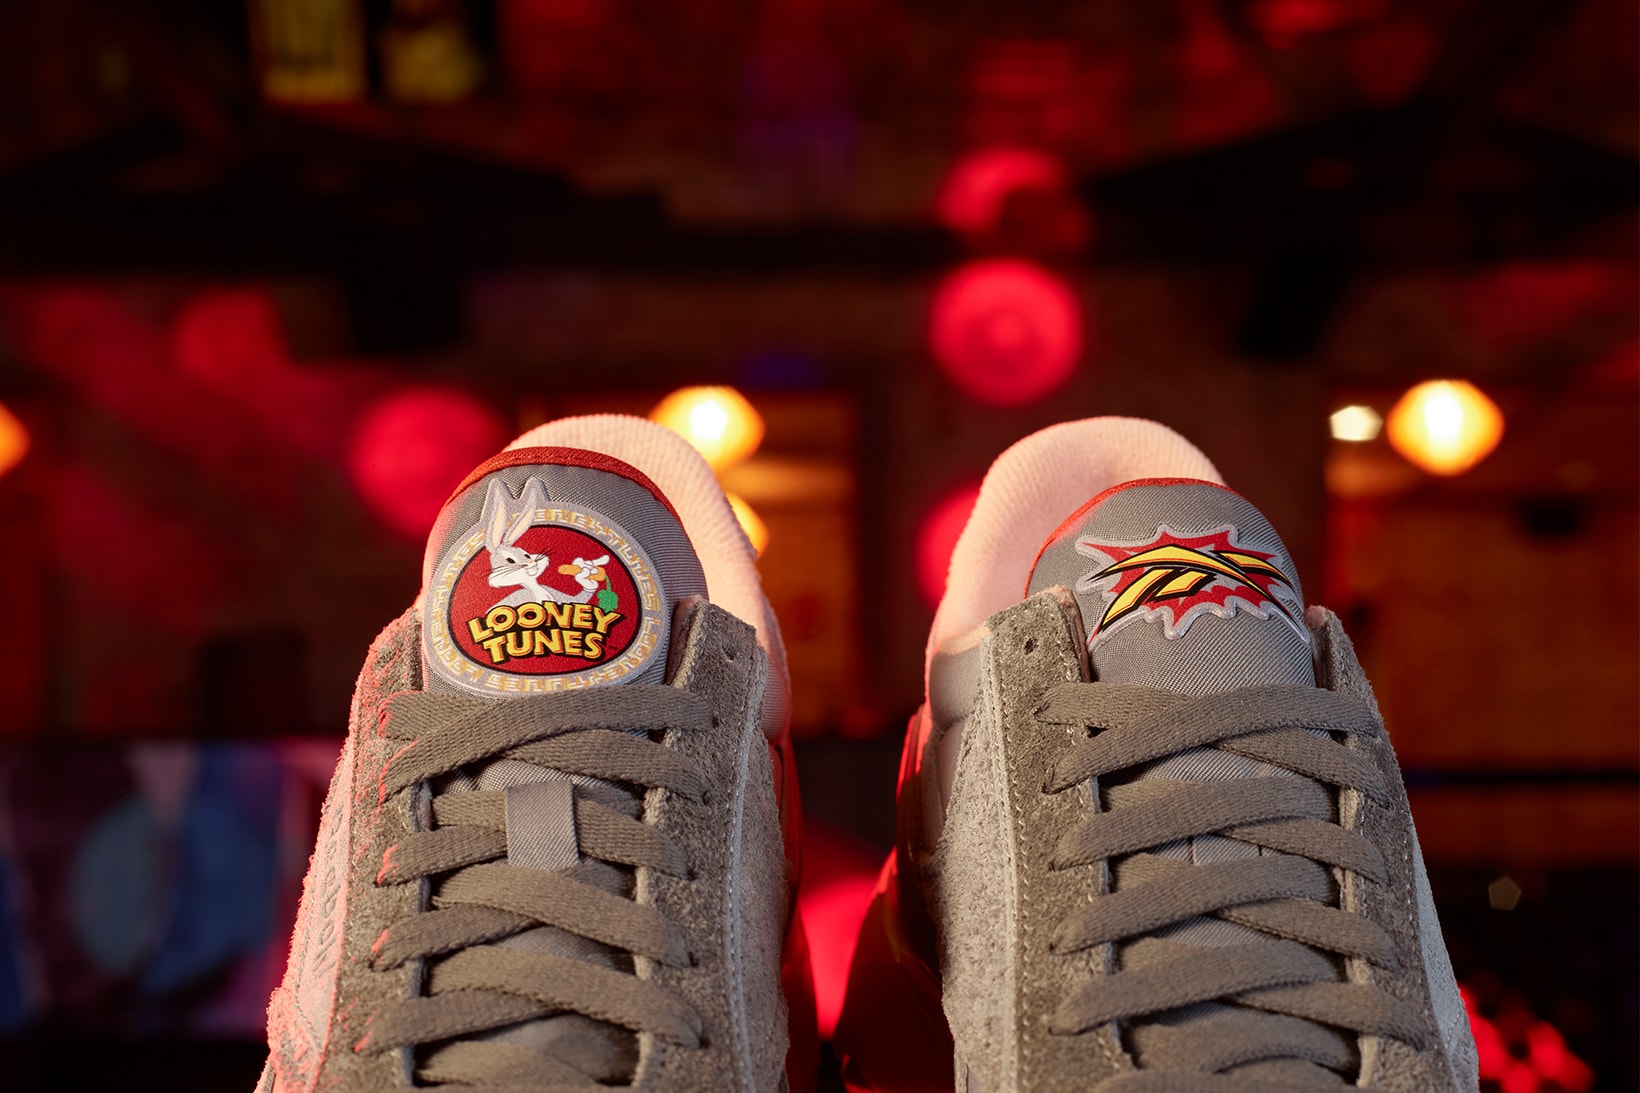 Reebok Warner Bros. Lunar New Year Collection Sneakers Classic Leather Legacy AZ Branding Details